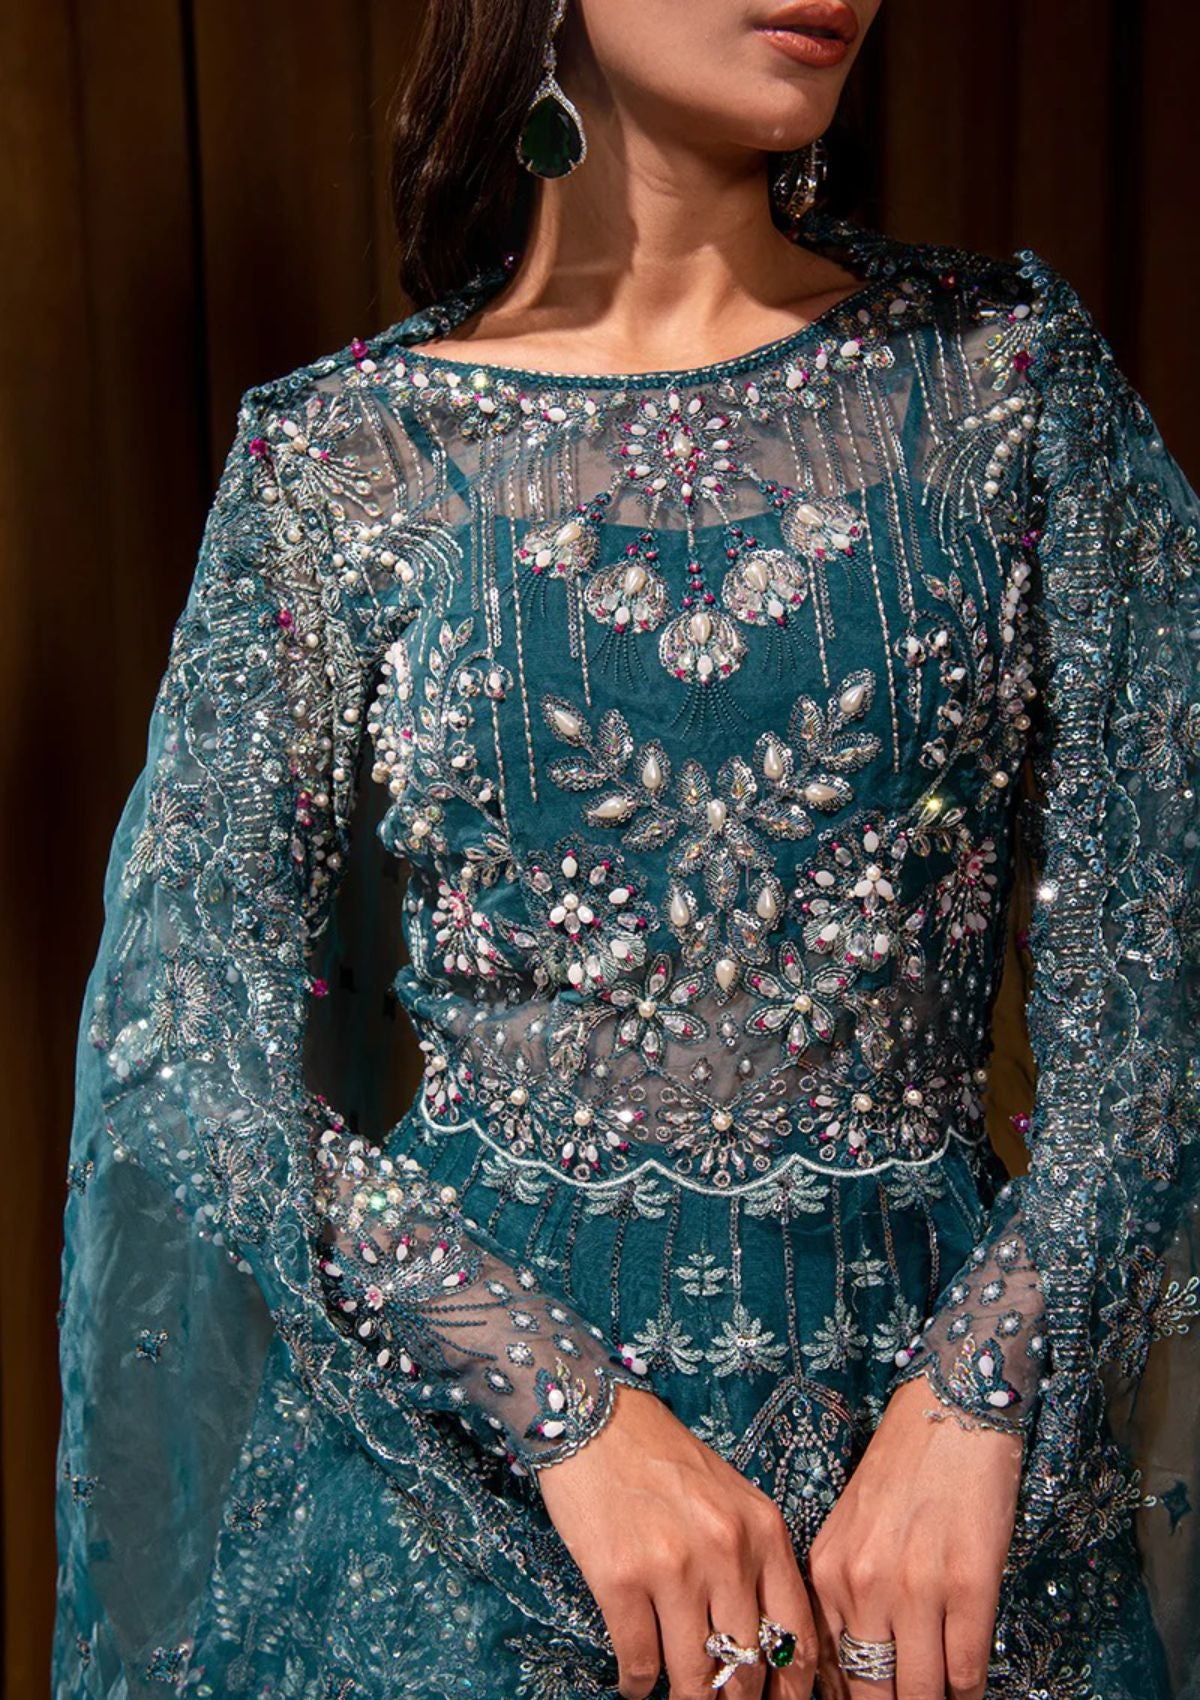 Formal Collection - Maria Osama Khan - Dastaan - DS#06 - Sanam